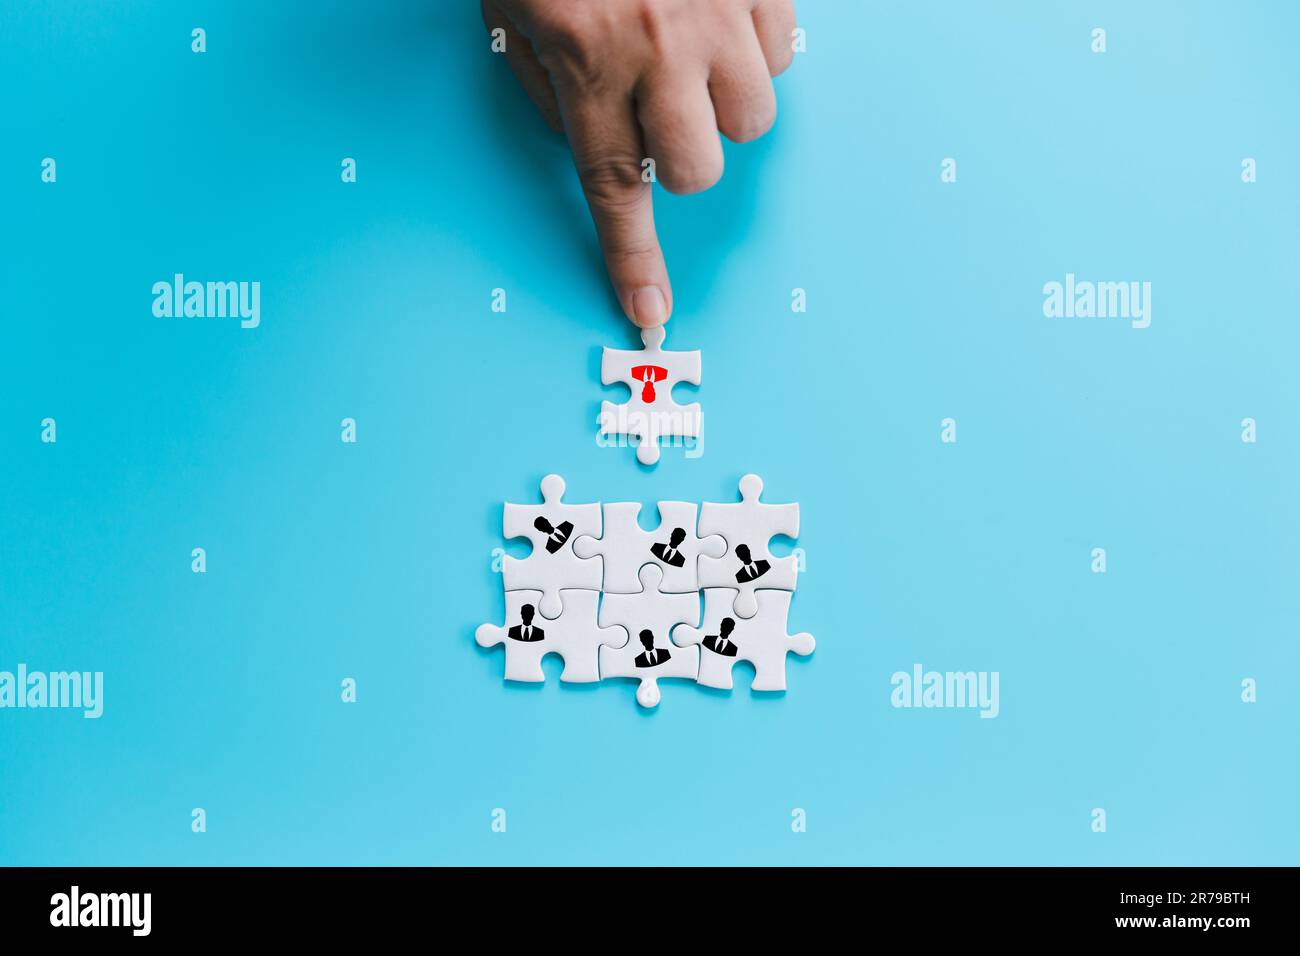 Human resources management and recruitment business build team concept. Image of tangram puzzle blocks with people icons over wooden table ,human reso Stock Photo